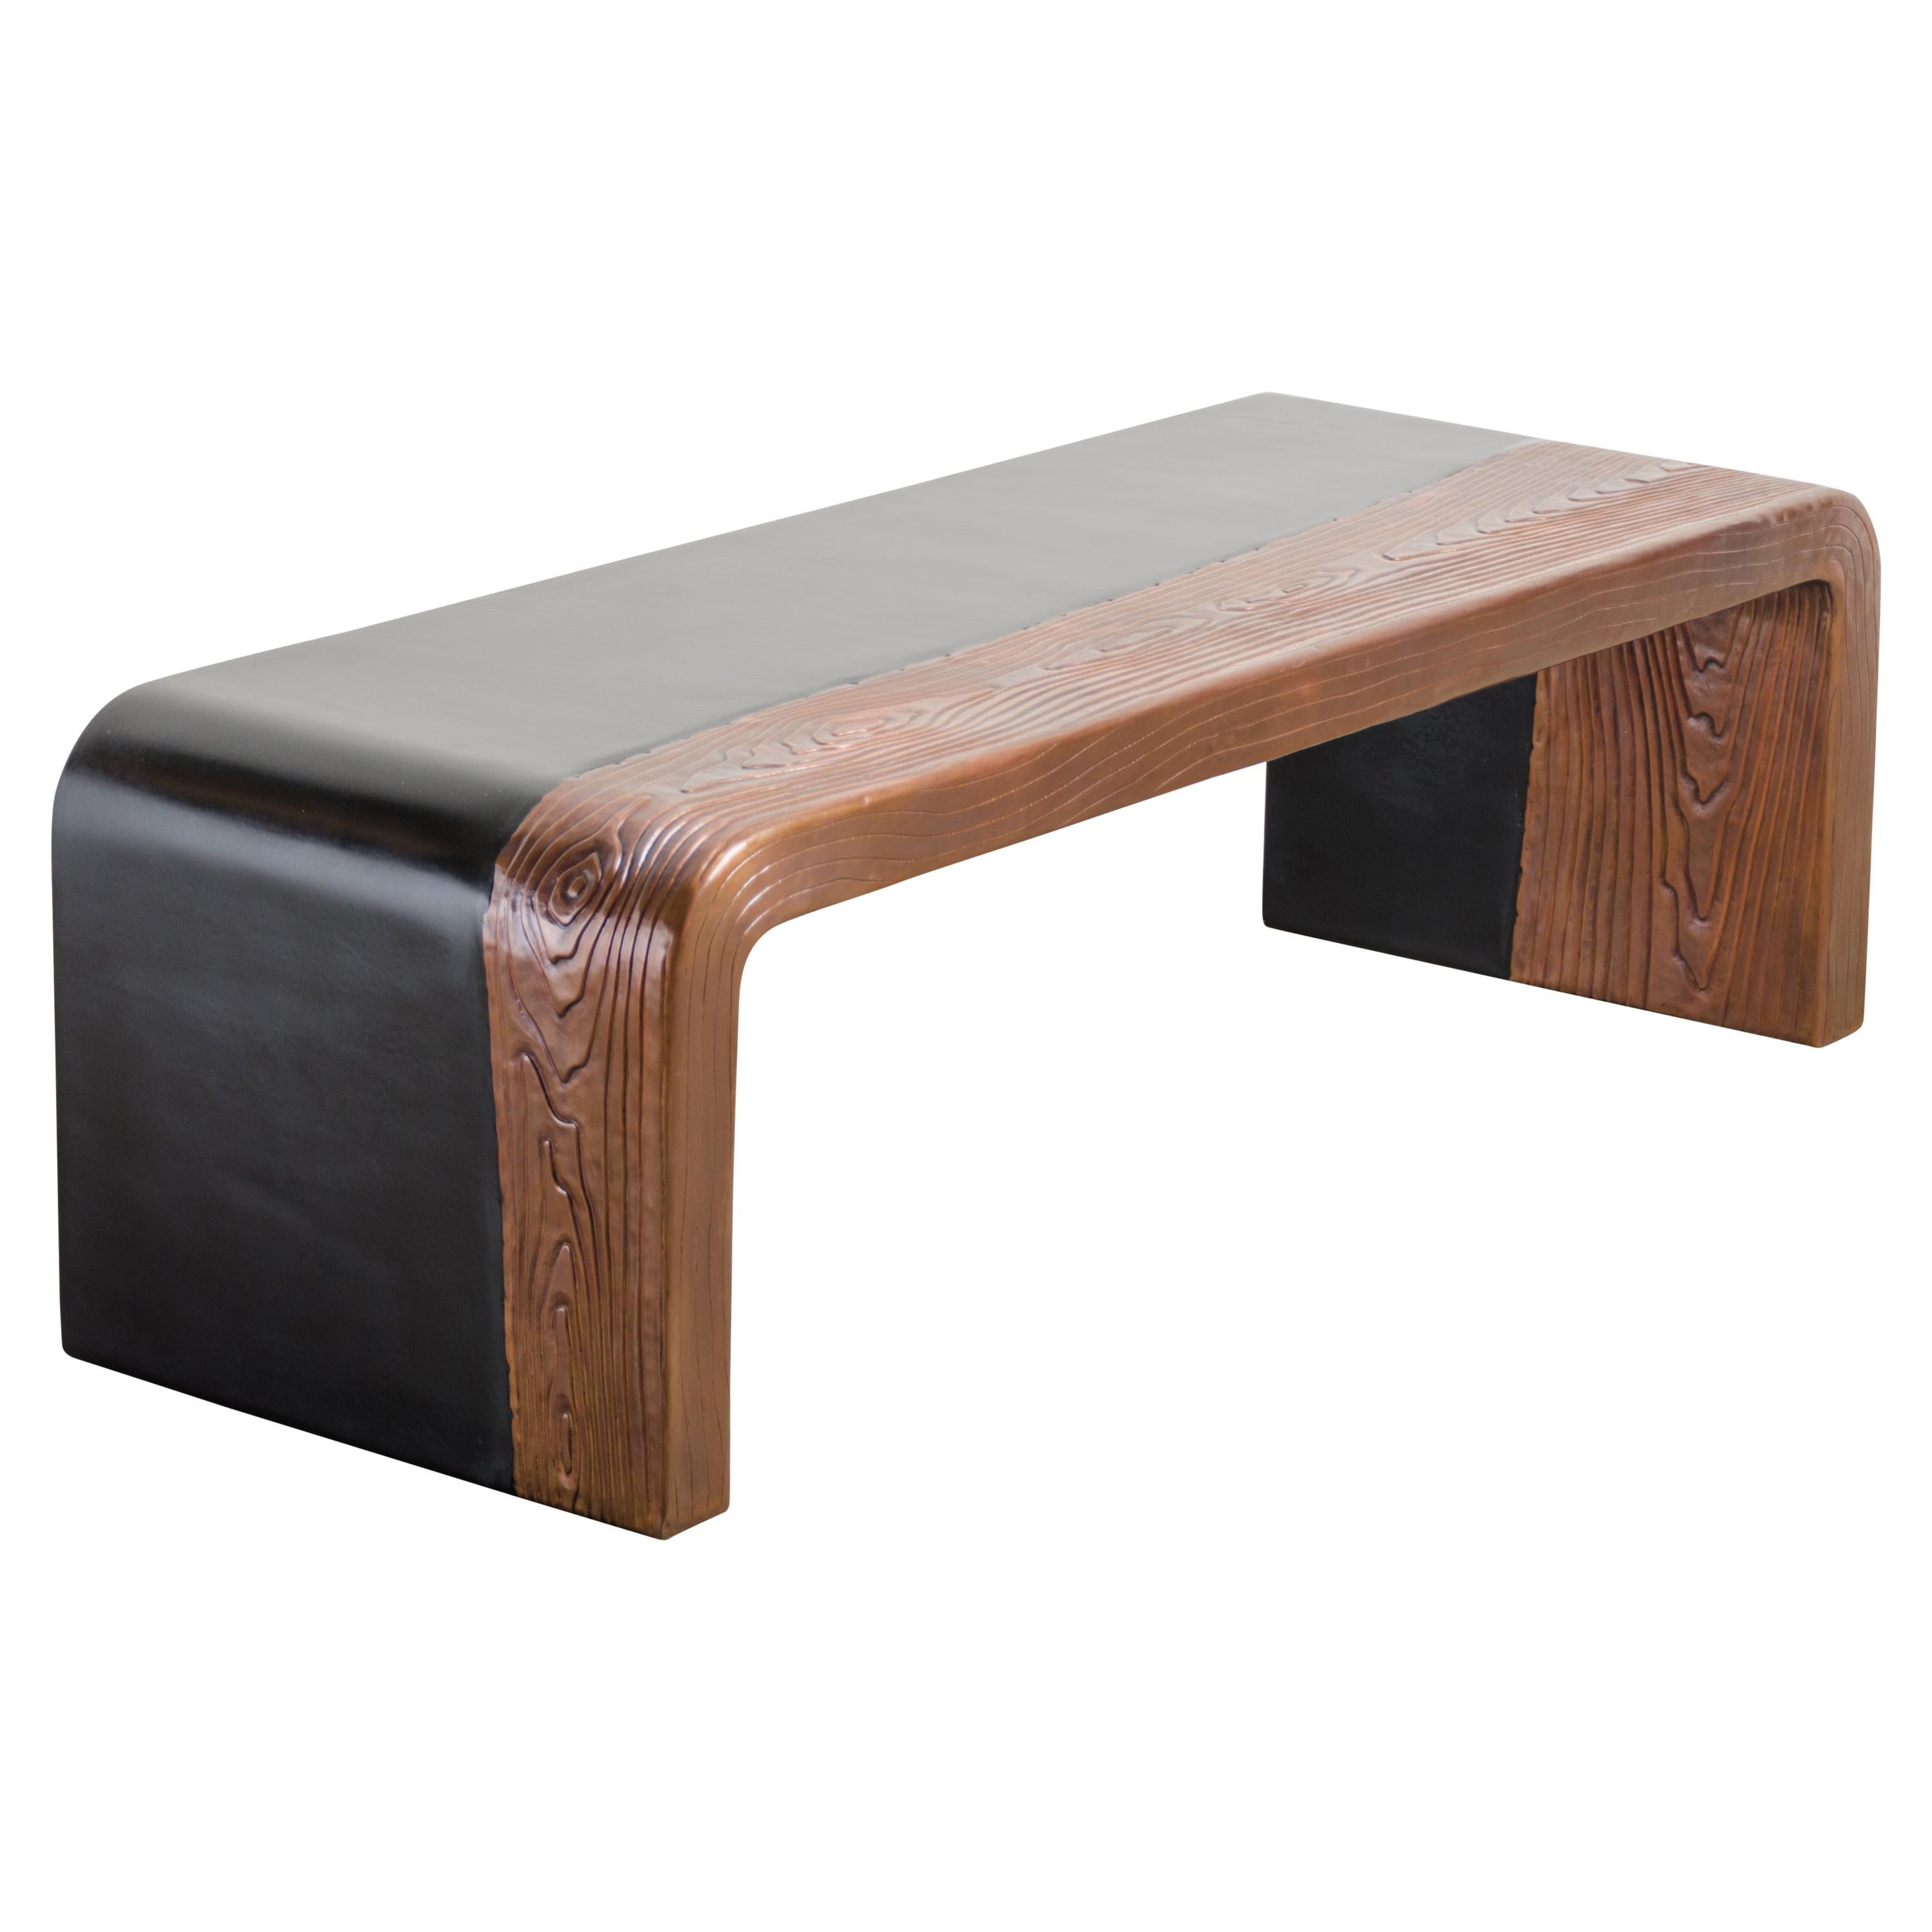 Woodgrain with Lacquer Bench by Robert Kuo, Hand Repousse, Limited Edition For Sale